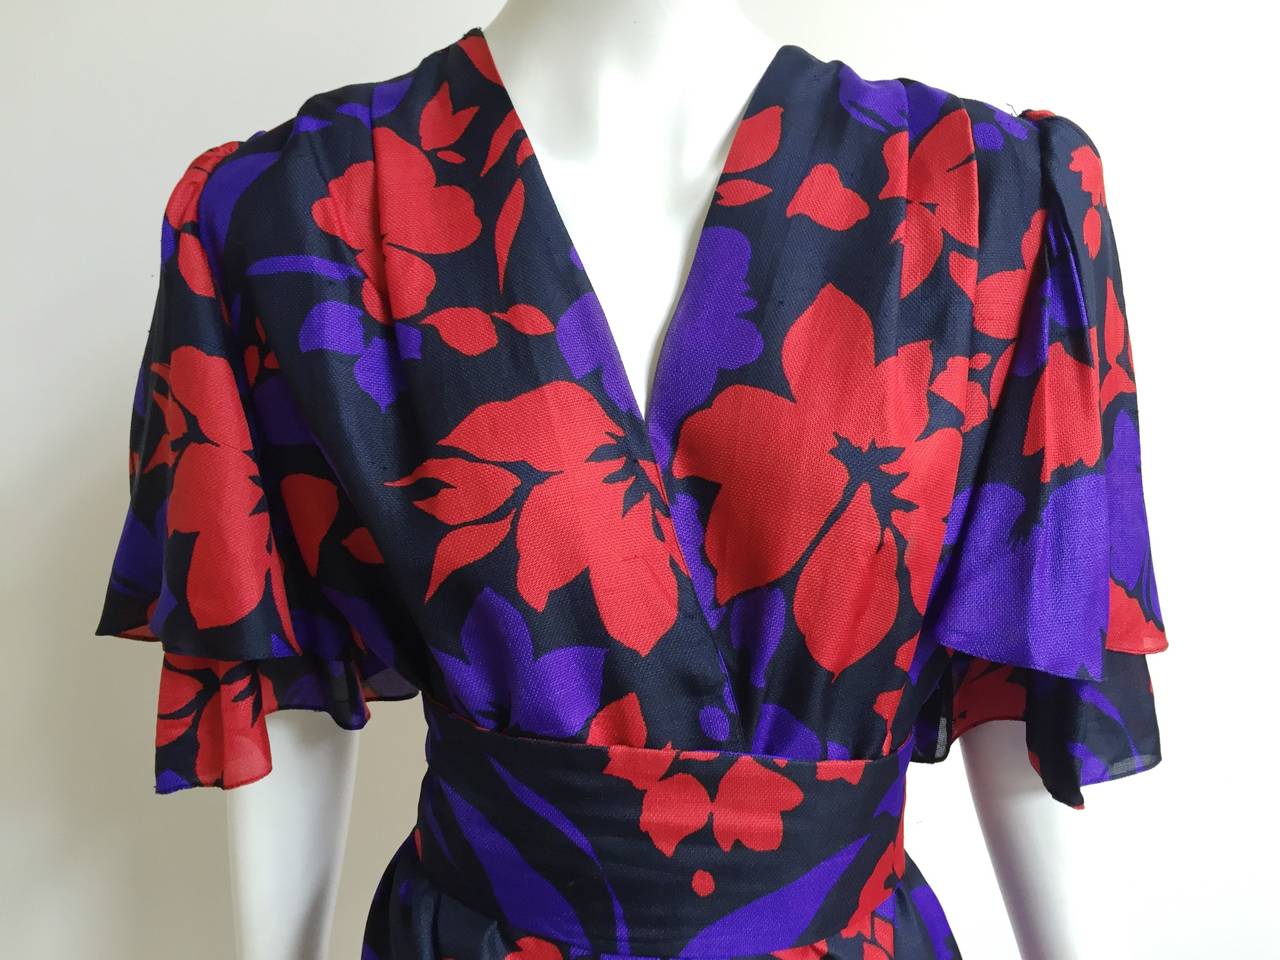 Givenchy 80s flower dress with sash belt size 12. 4